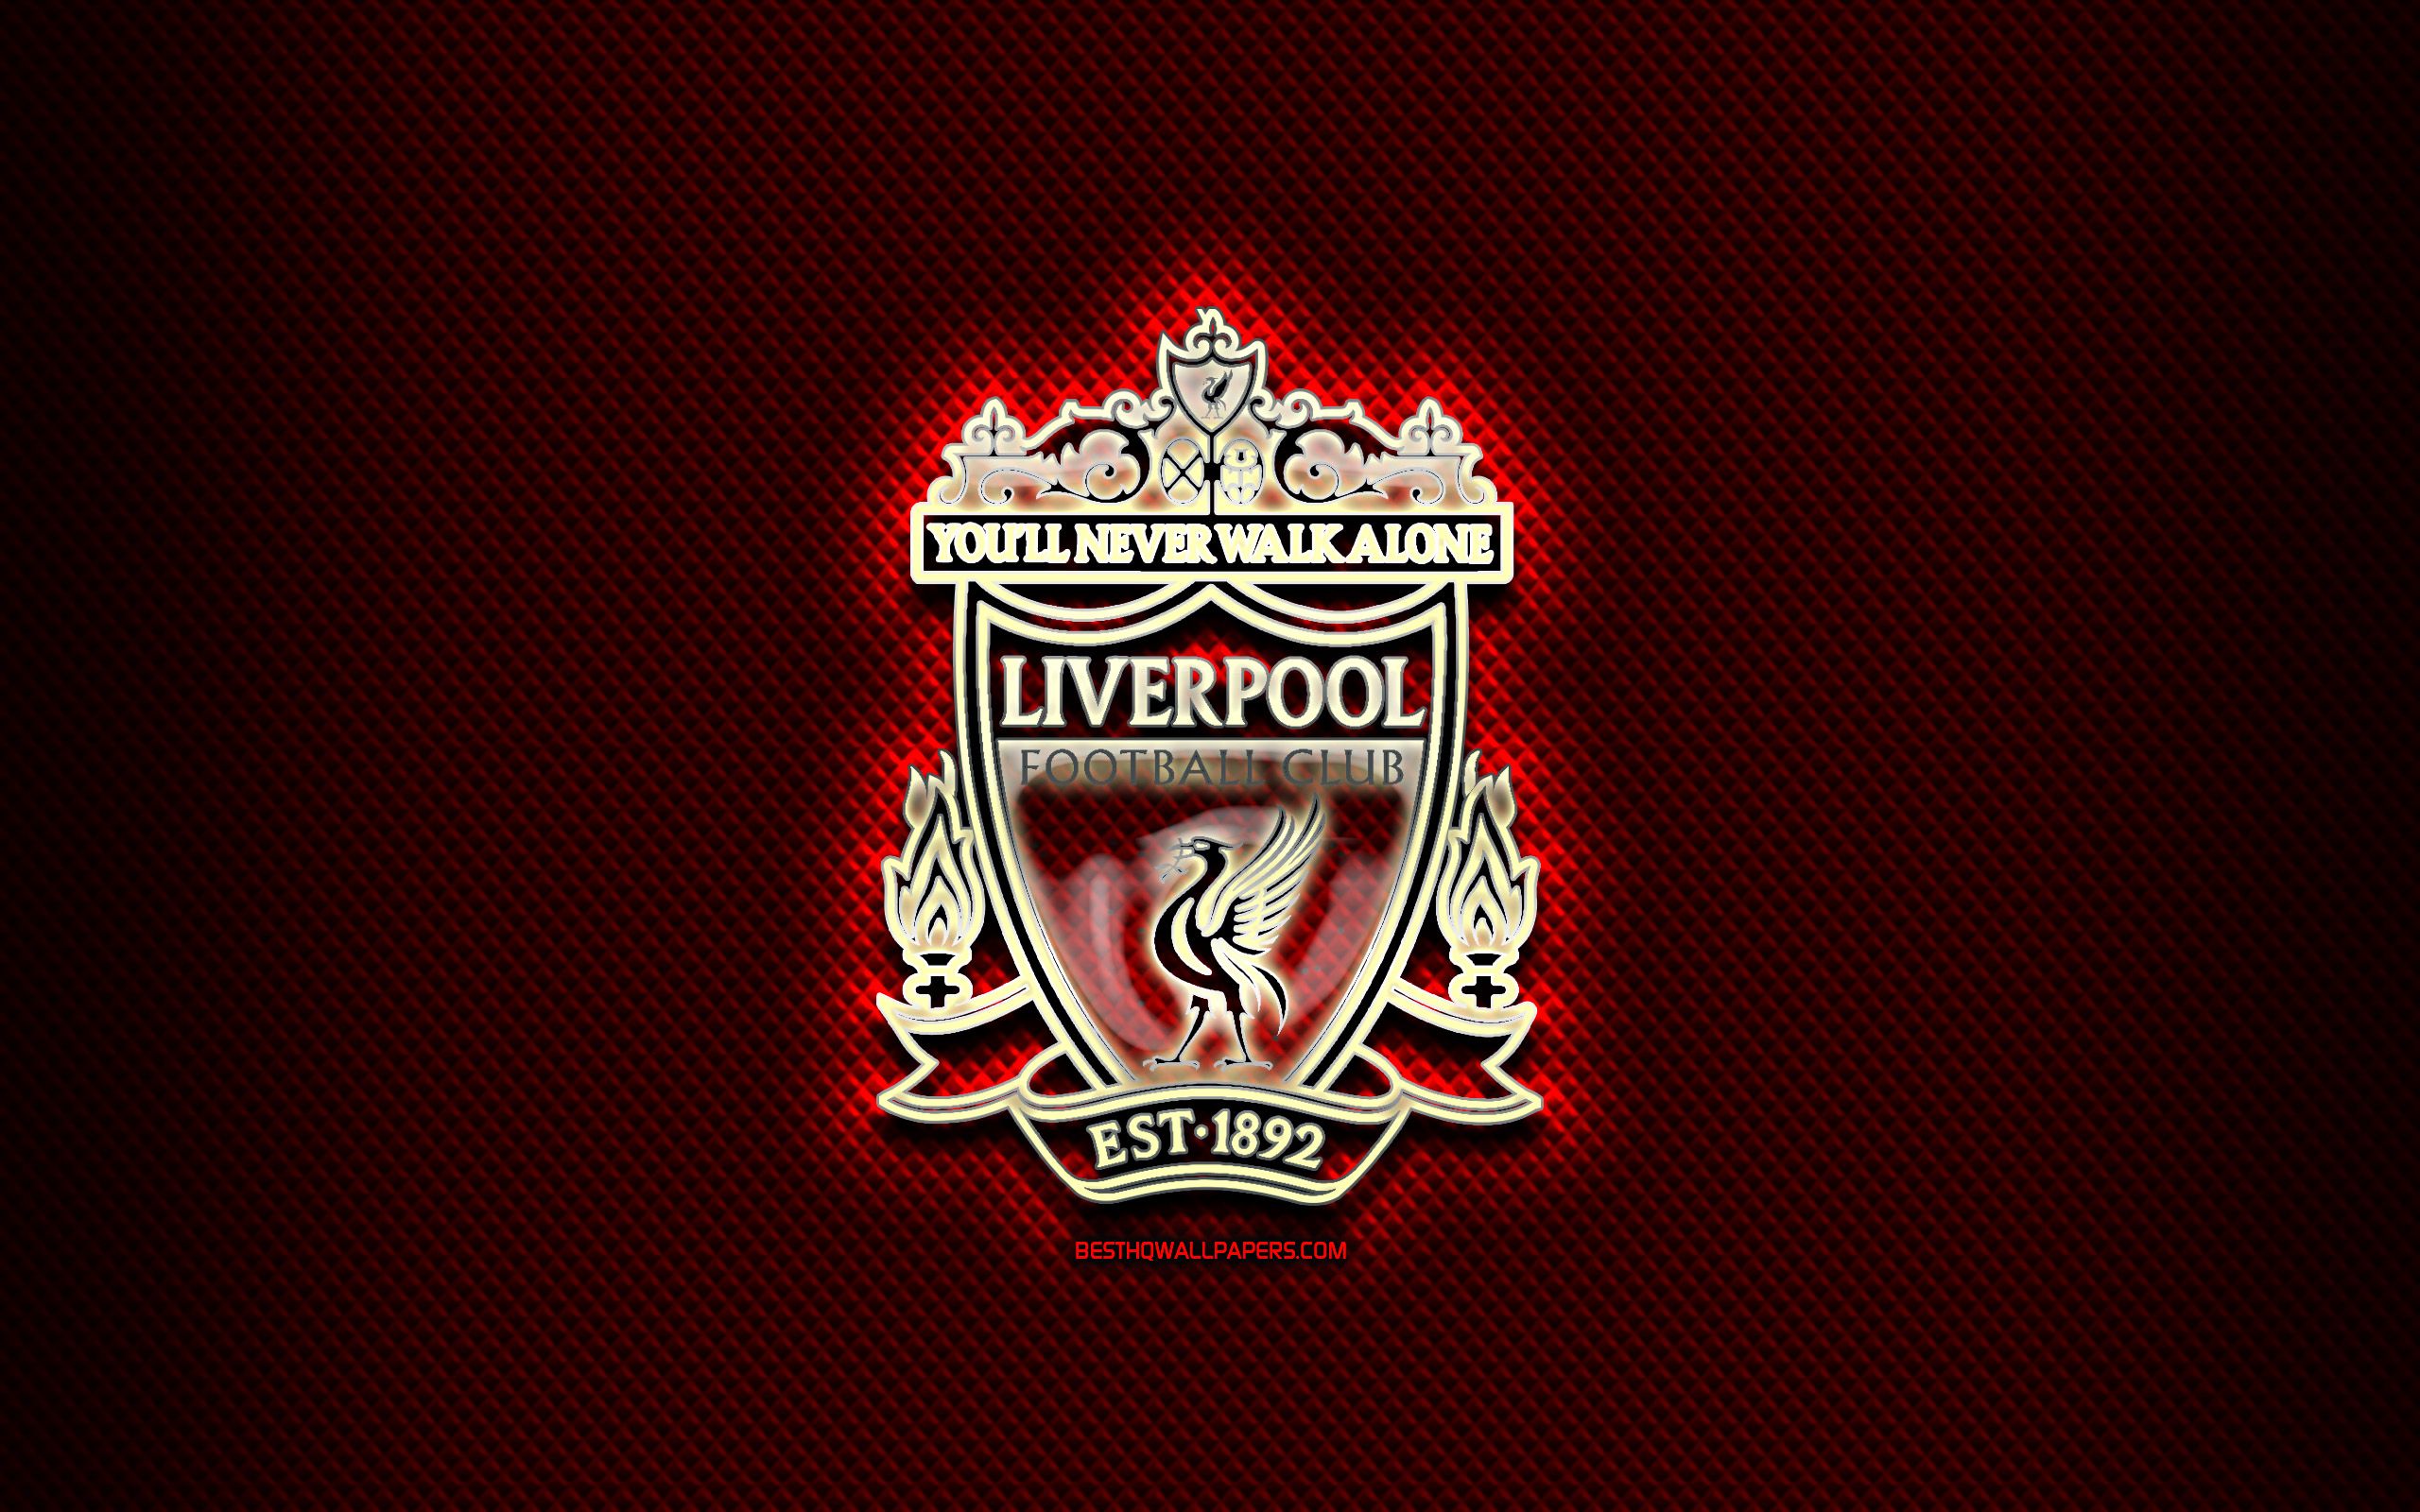 Download wallpaper Liverpool FC, glass logo, red rhombic